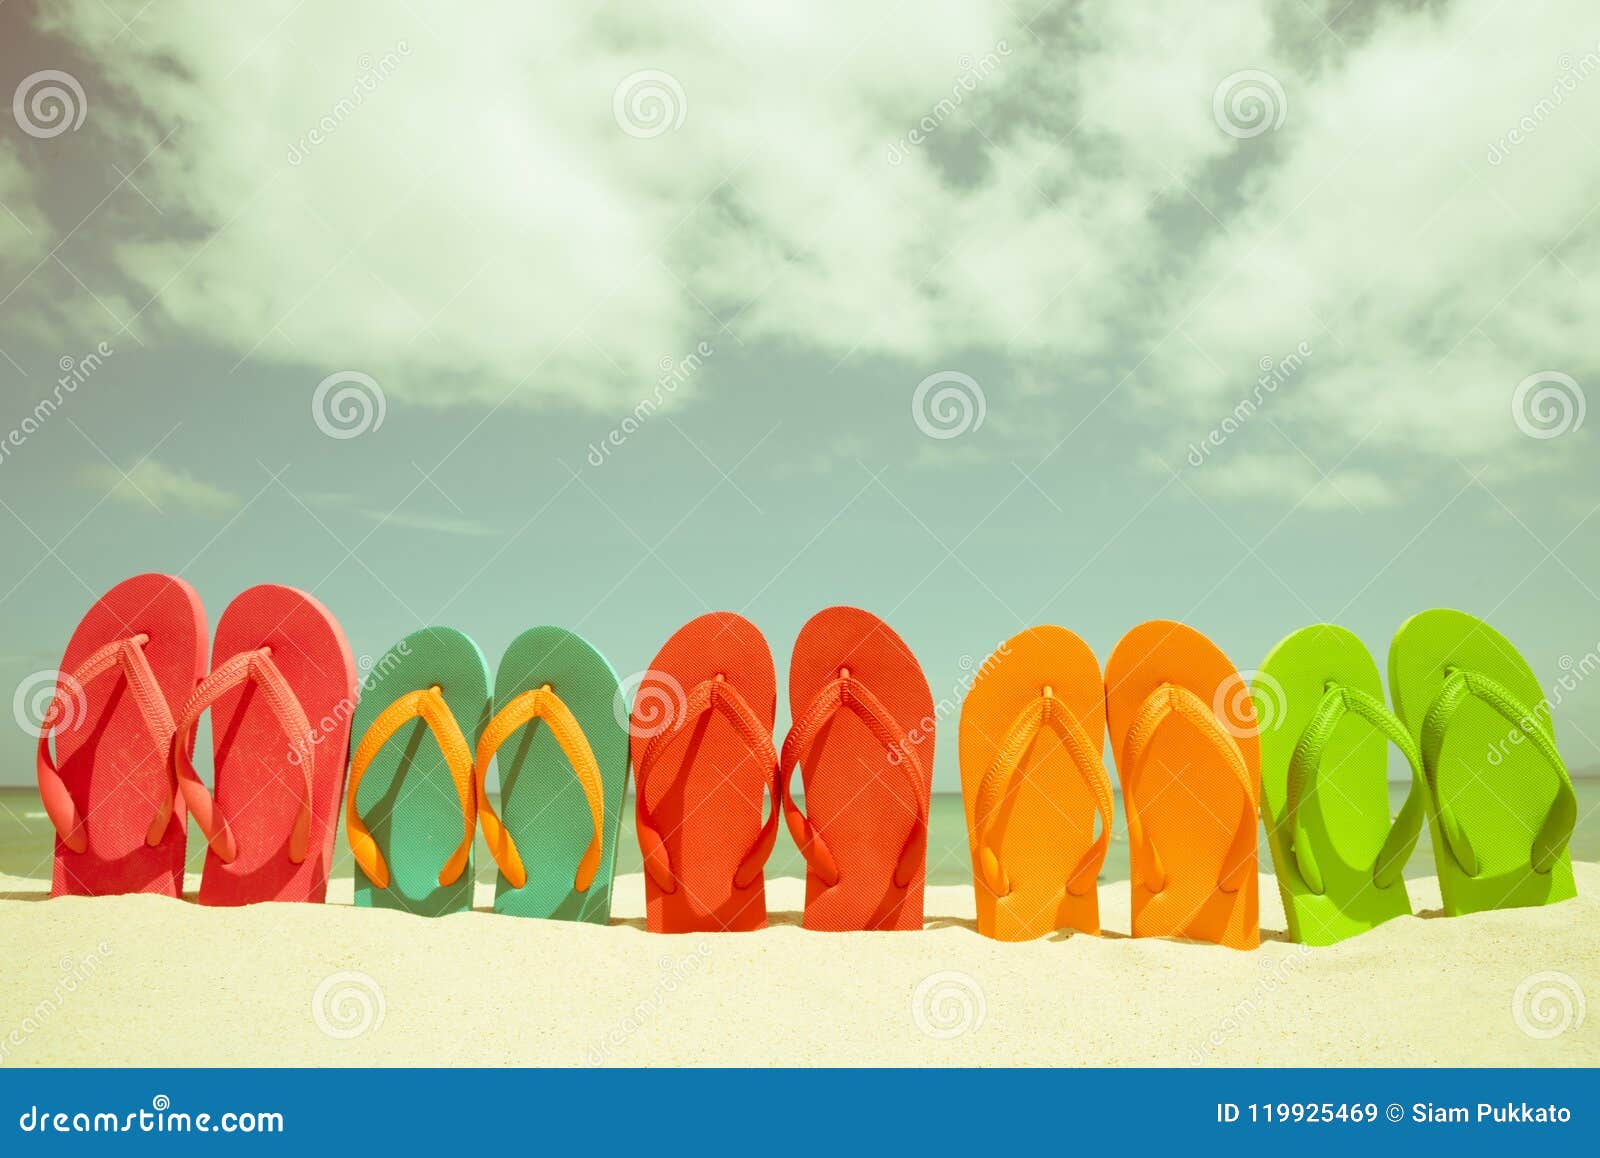 Colorful Flip Flop on Sandy Beach, Green Sea and Blue Sky Stock Image ...